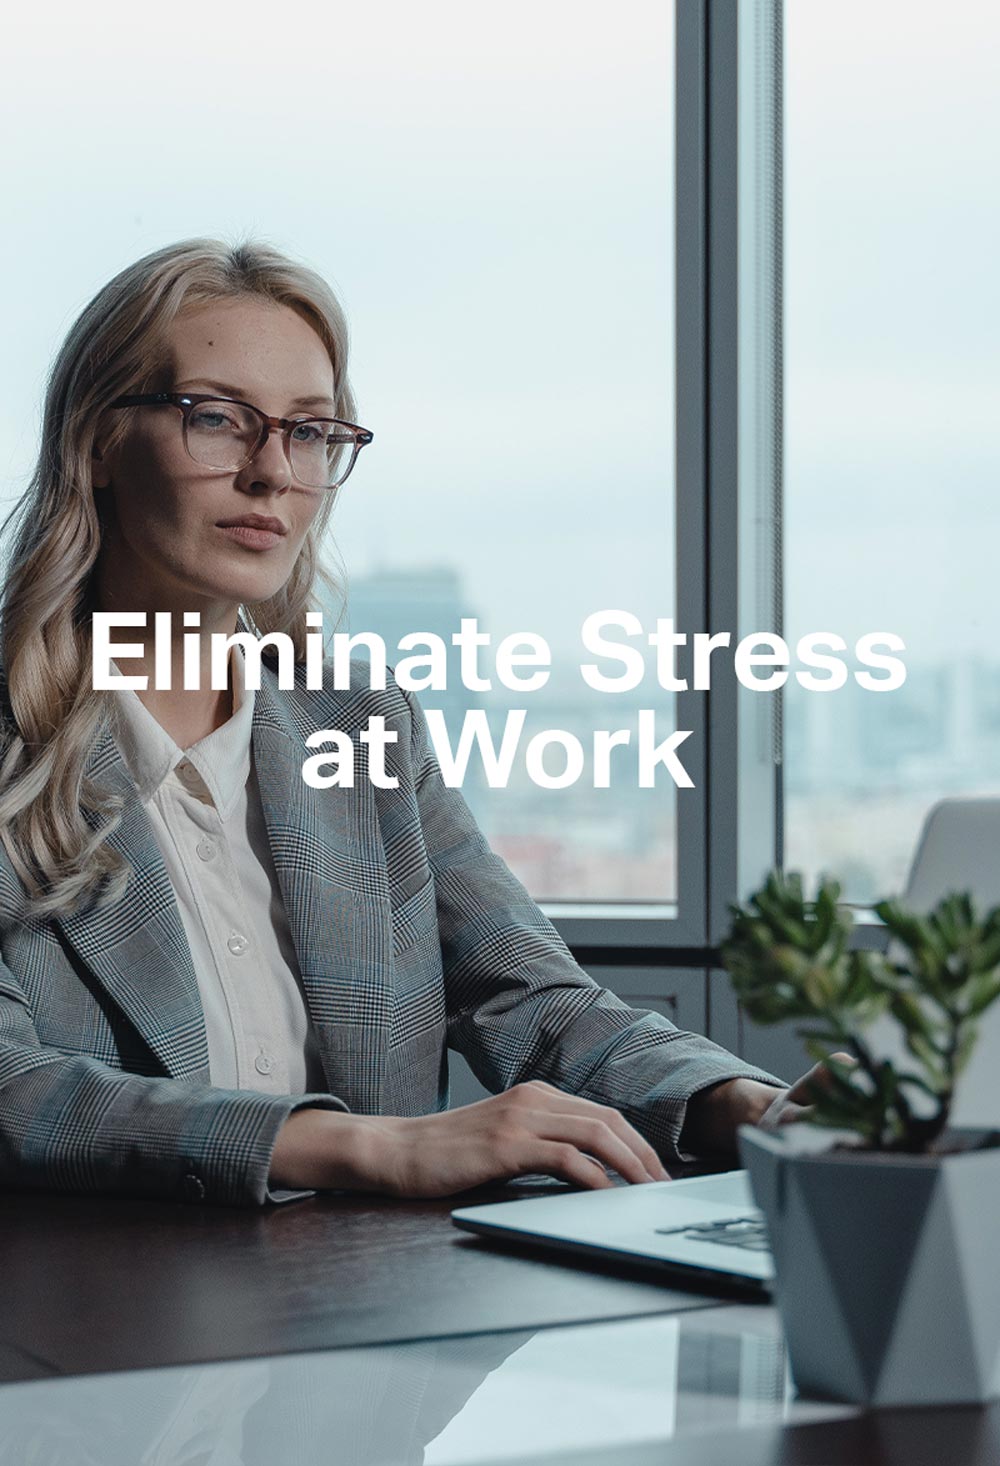 Tips to Fashionably Eliminate Stress at Work